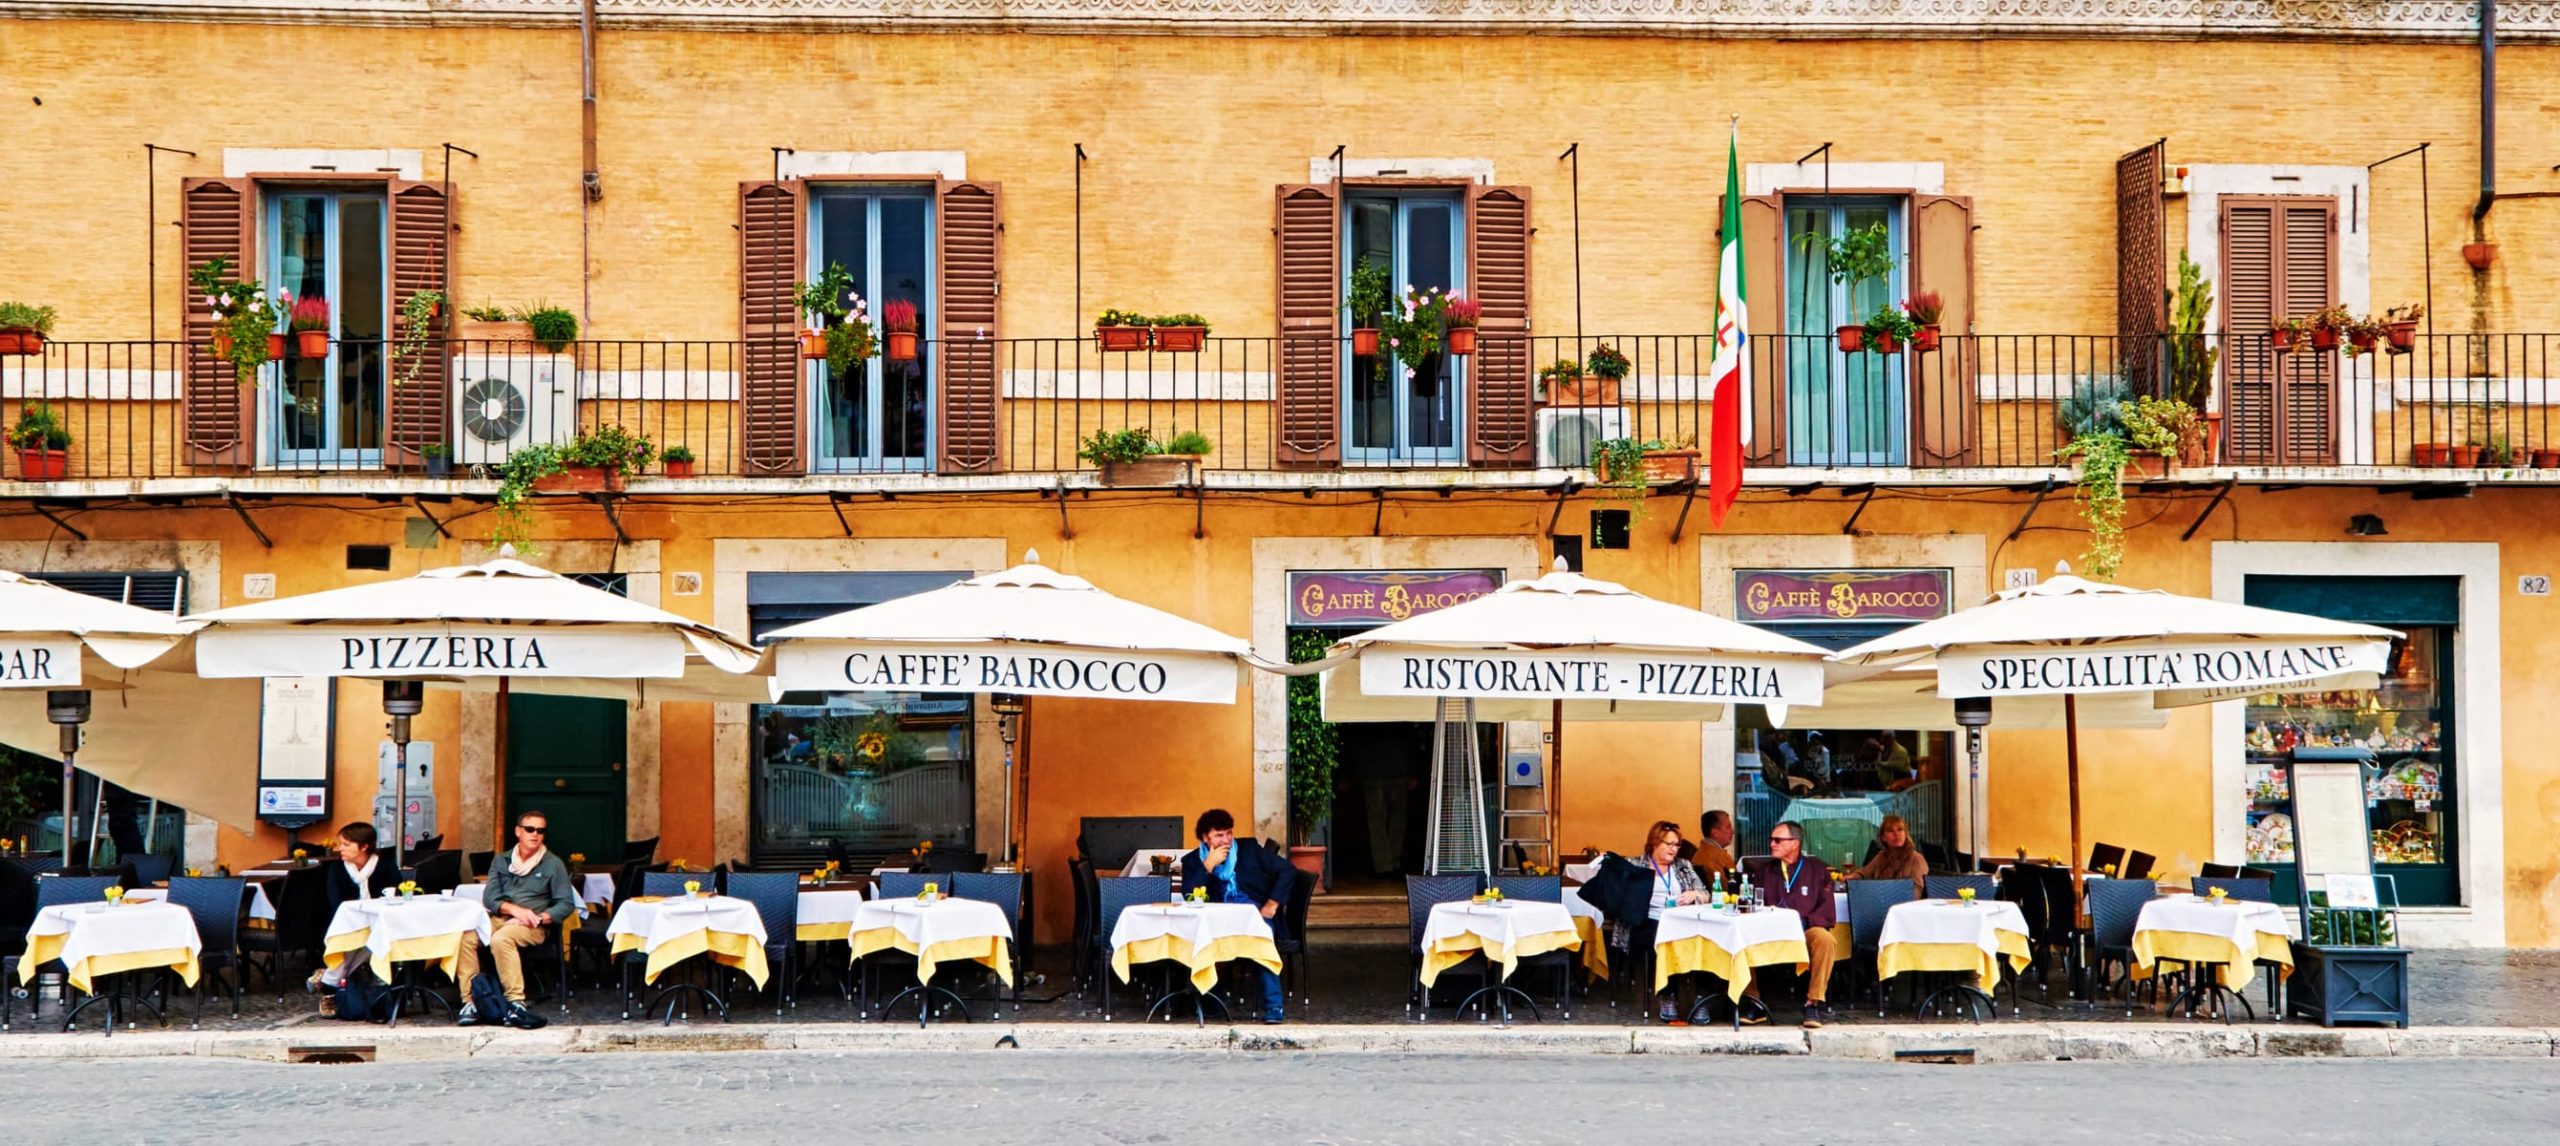 The 12 Best Foods To Try in Rome, Italy